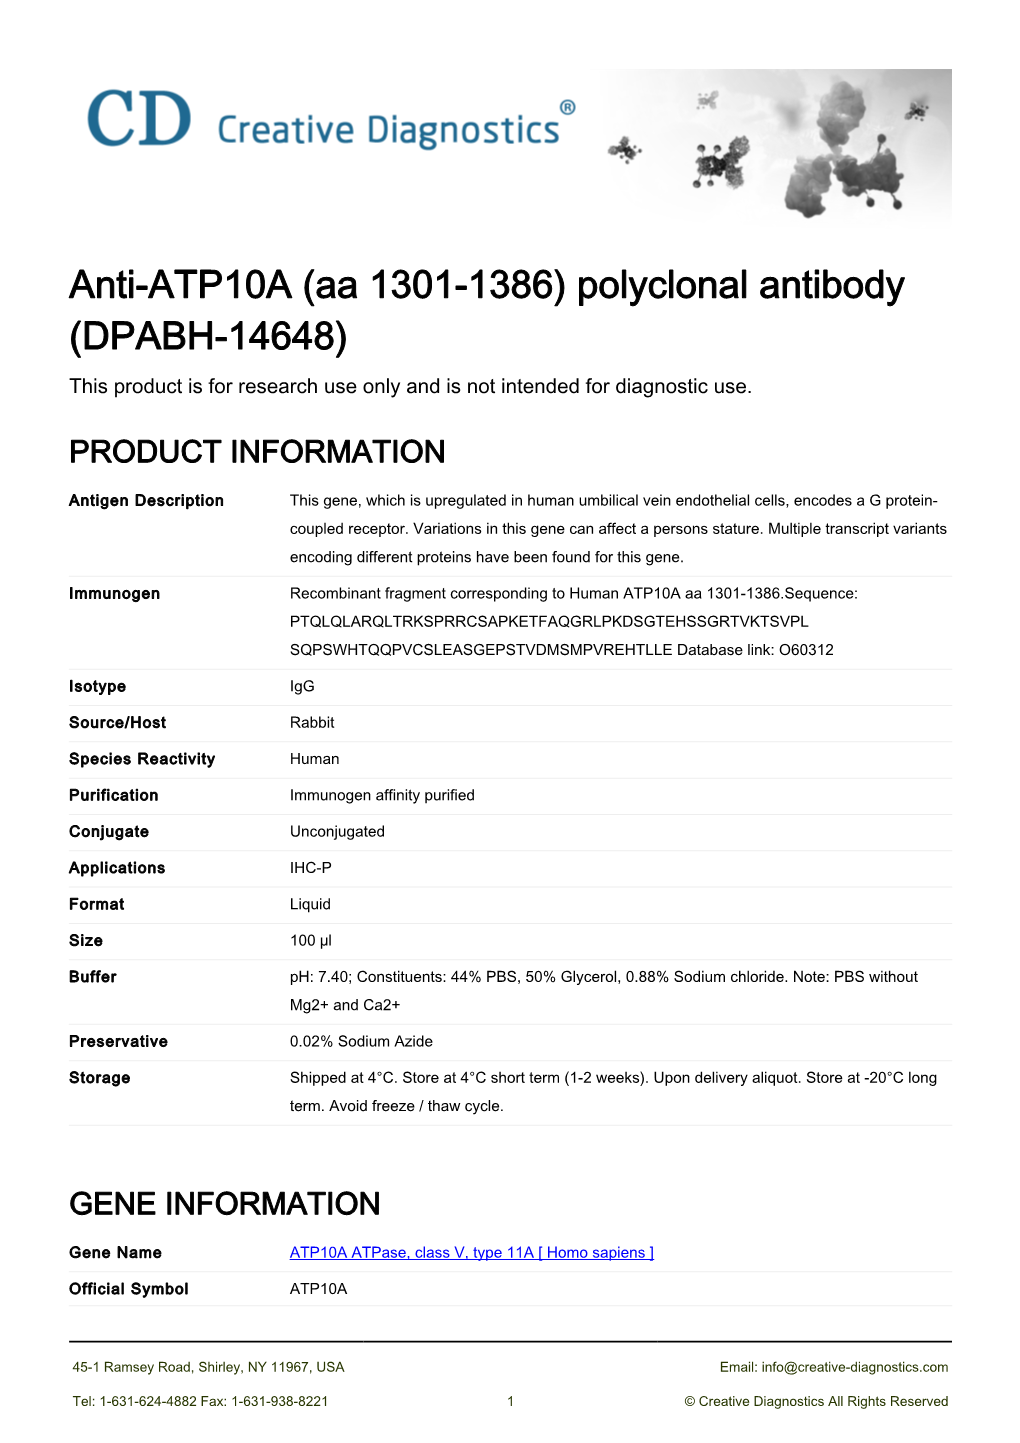 Anti-ATP10A (Aa 1301-1386) Polyclonal Antibody (DPABH-14648) This Product Is for Research Use Only and Is Not Intended for Diagnostic Use